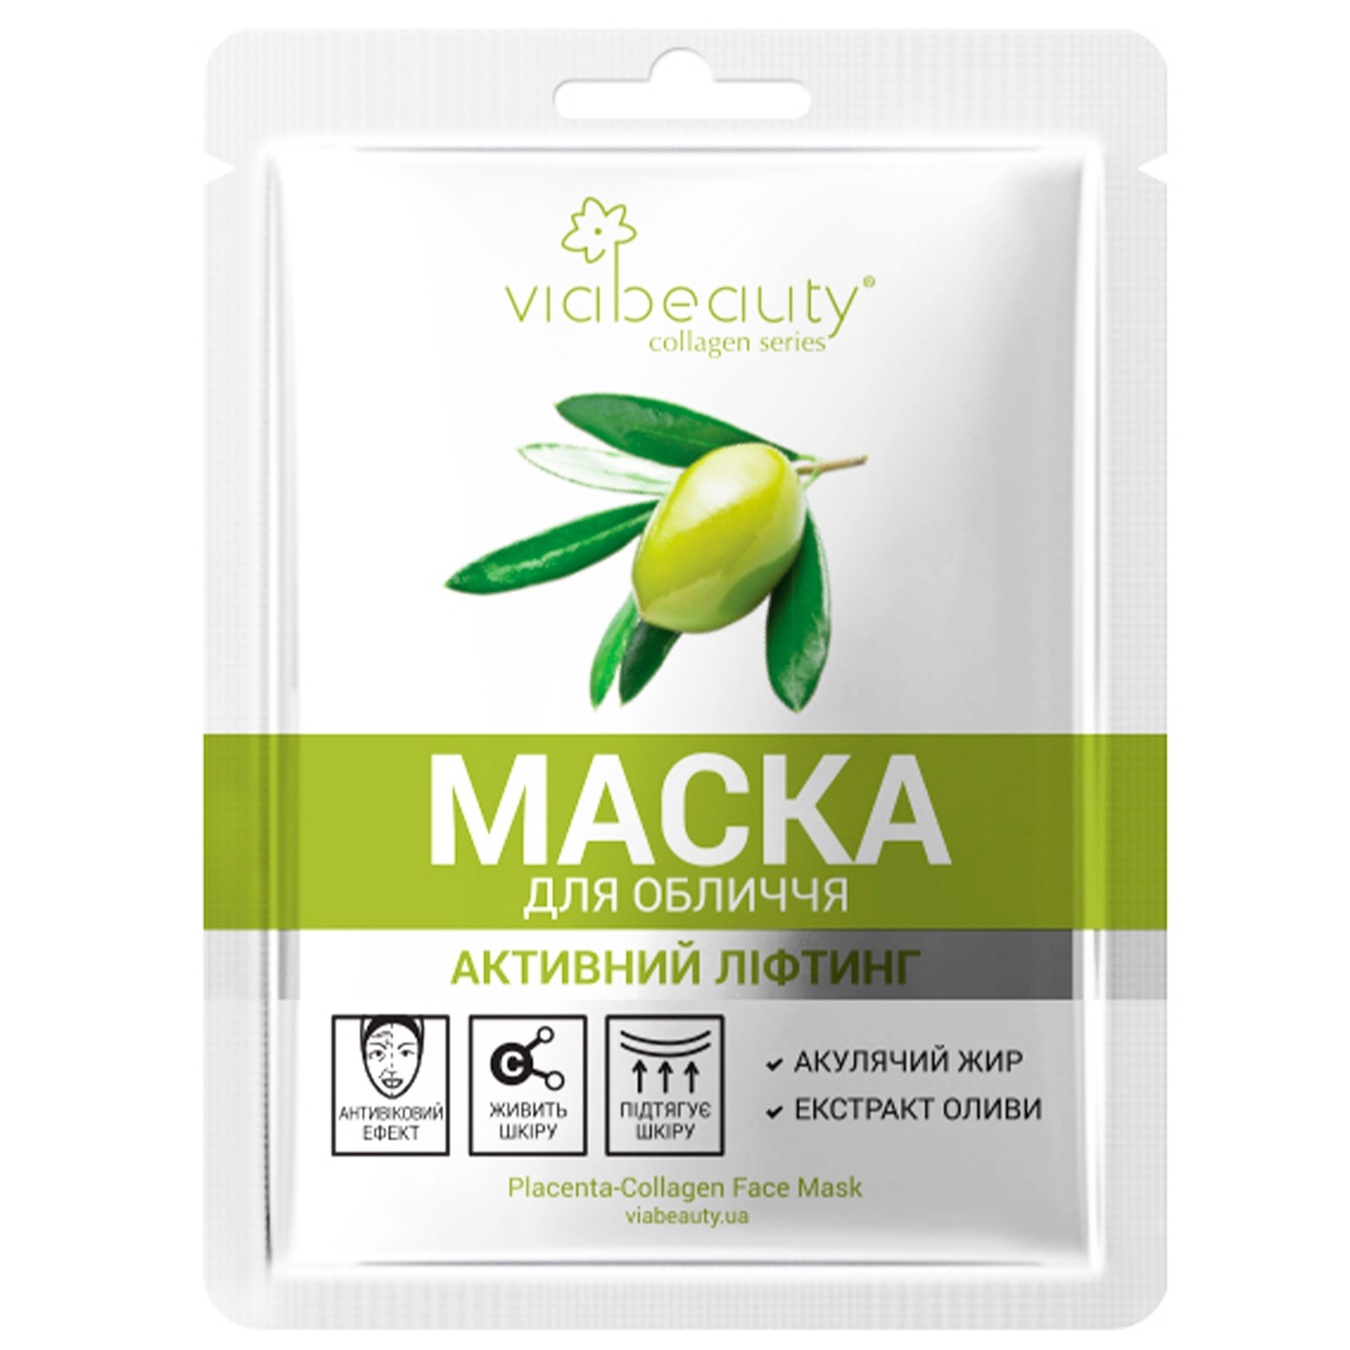 VIABEAUTY tissue face mask with olive extract and collagen for active lifting